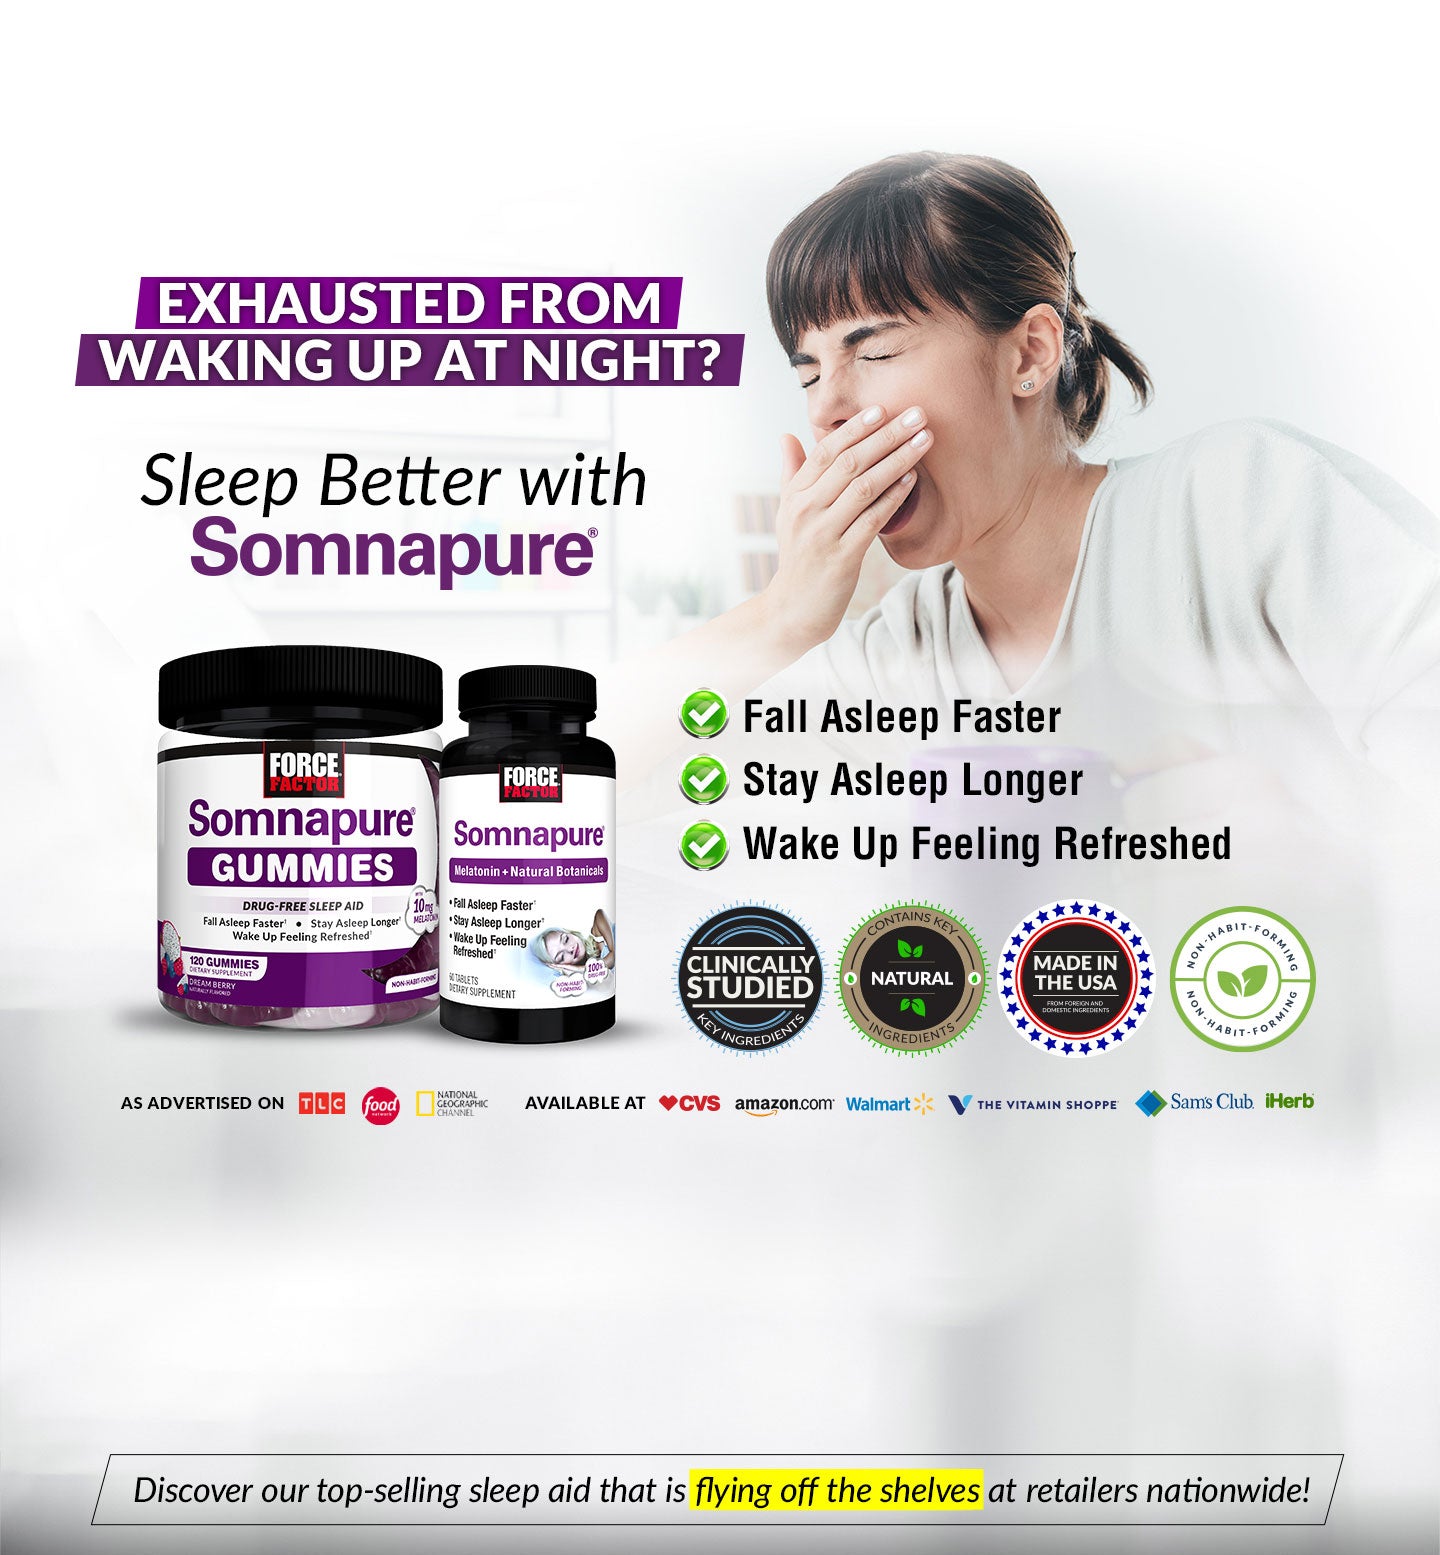 EXHAUSTED FROM WAKING UP AT NIGHT? Sleep Better with Somnapure®. Fall Asleep Longer, Stay Asleep Longer, Wake Up Feeling Refreshed. Discover our top-selling sleep aid that is flying off the shelves at retailers nationwide!